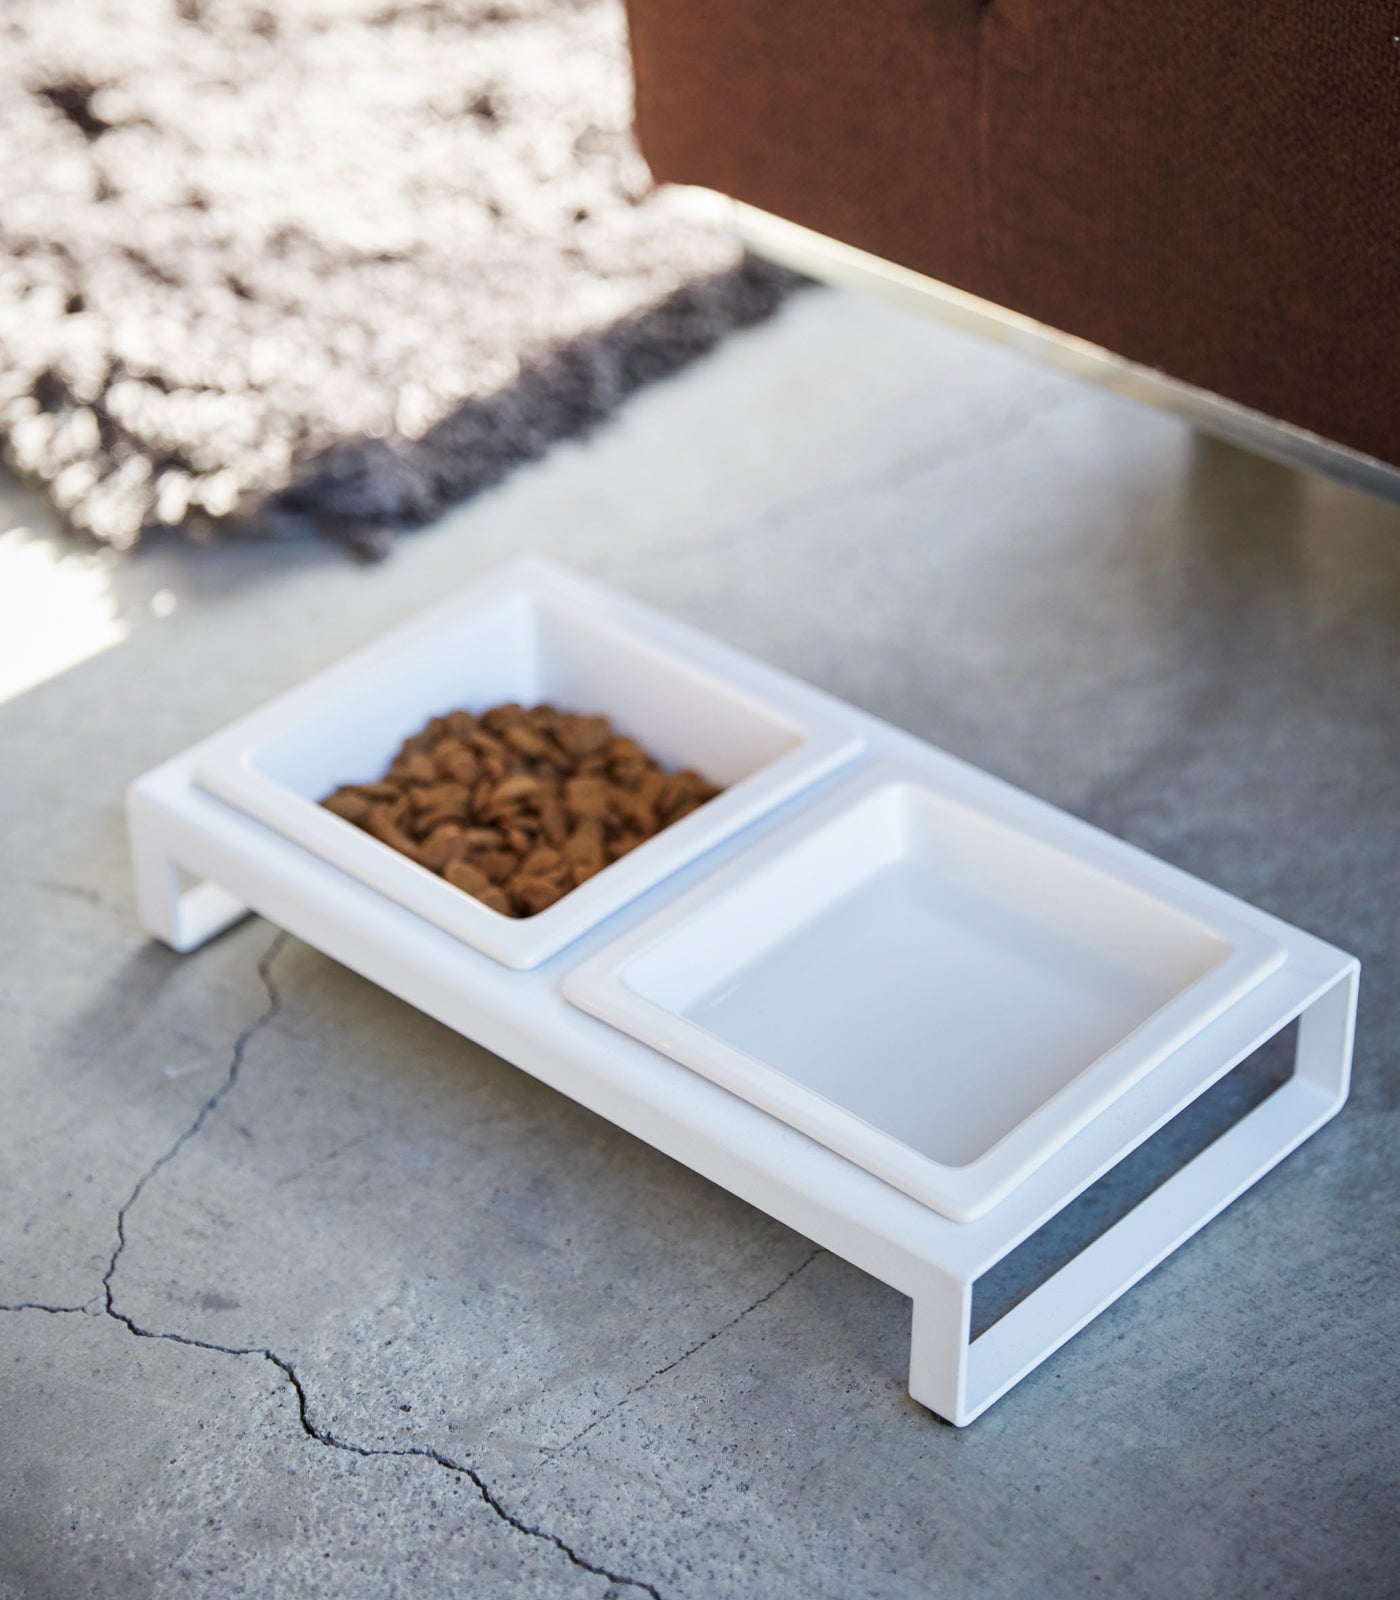 Stylish white Yamazaki Home pet feeding station with two ceramic Pet Food Bowls, one filled with kibble, on a concrete floor.